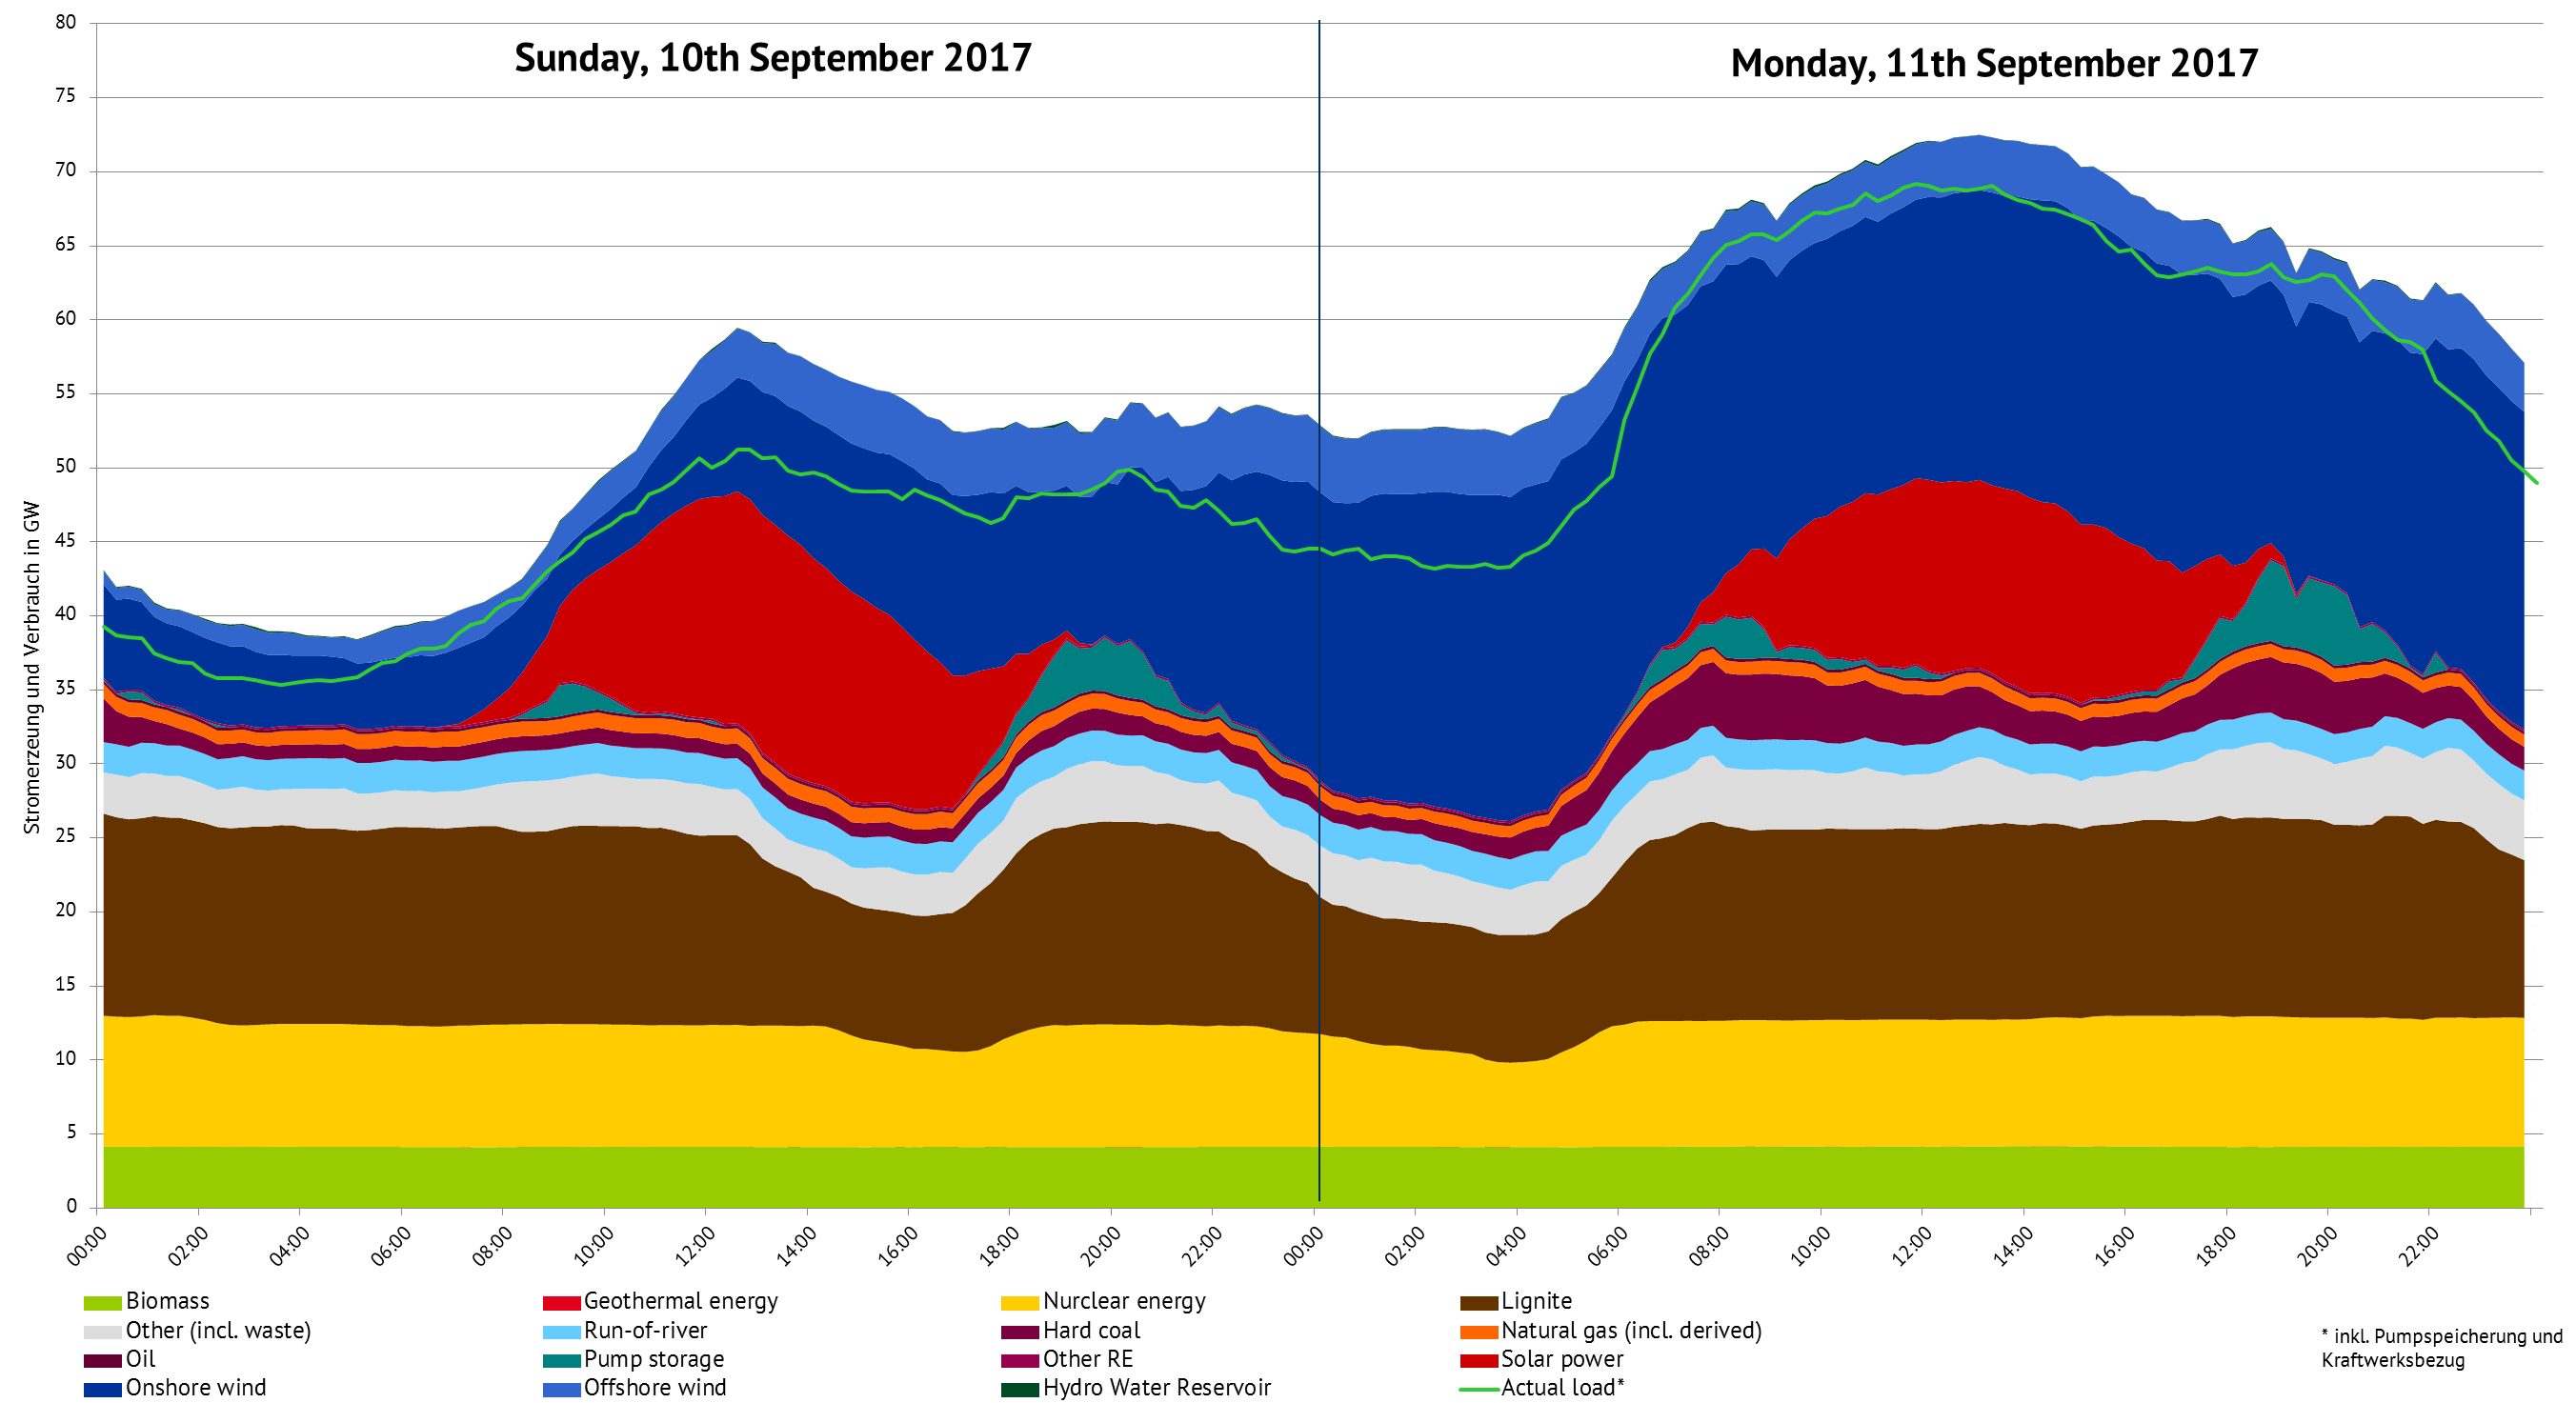 Electricity generation and load in Germany. Source: ENTSO-E Transparency, own figure